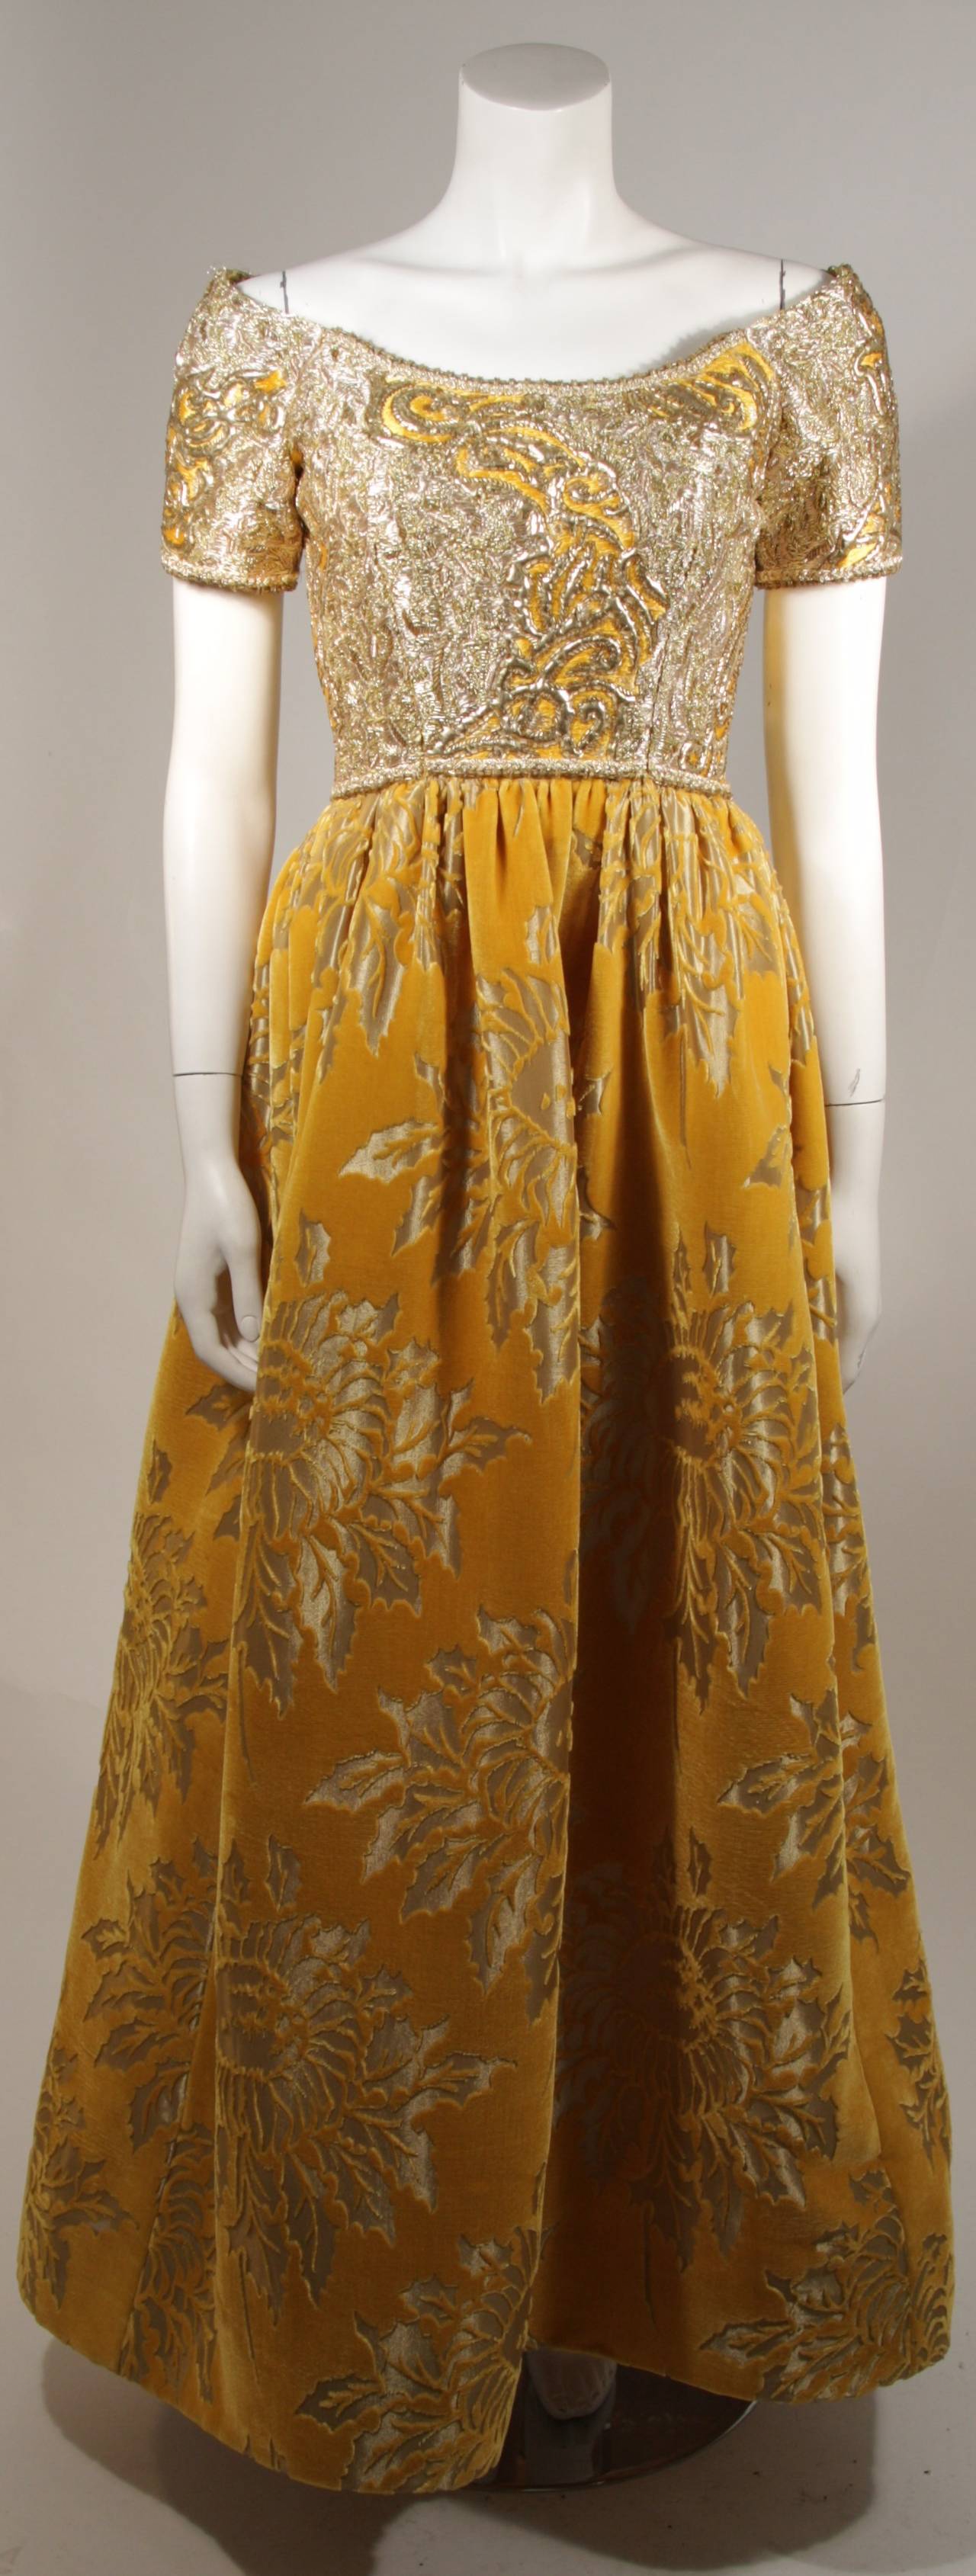 This Oscar De La Renta Couture design is available for viewing at our Beverly Hills Boutique. We offer a large selection of evening gowns and luxury garments.

This gown is composed of gold and mustard hues in embellished silk and mustard yellow